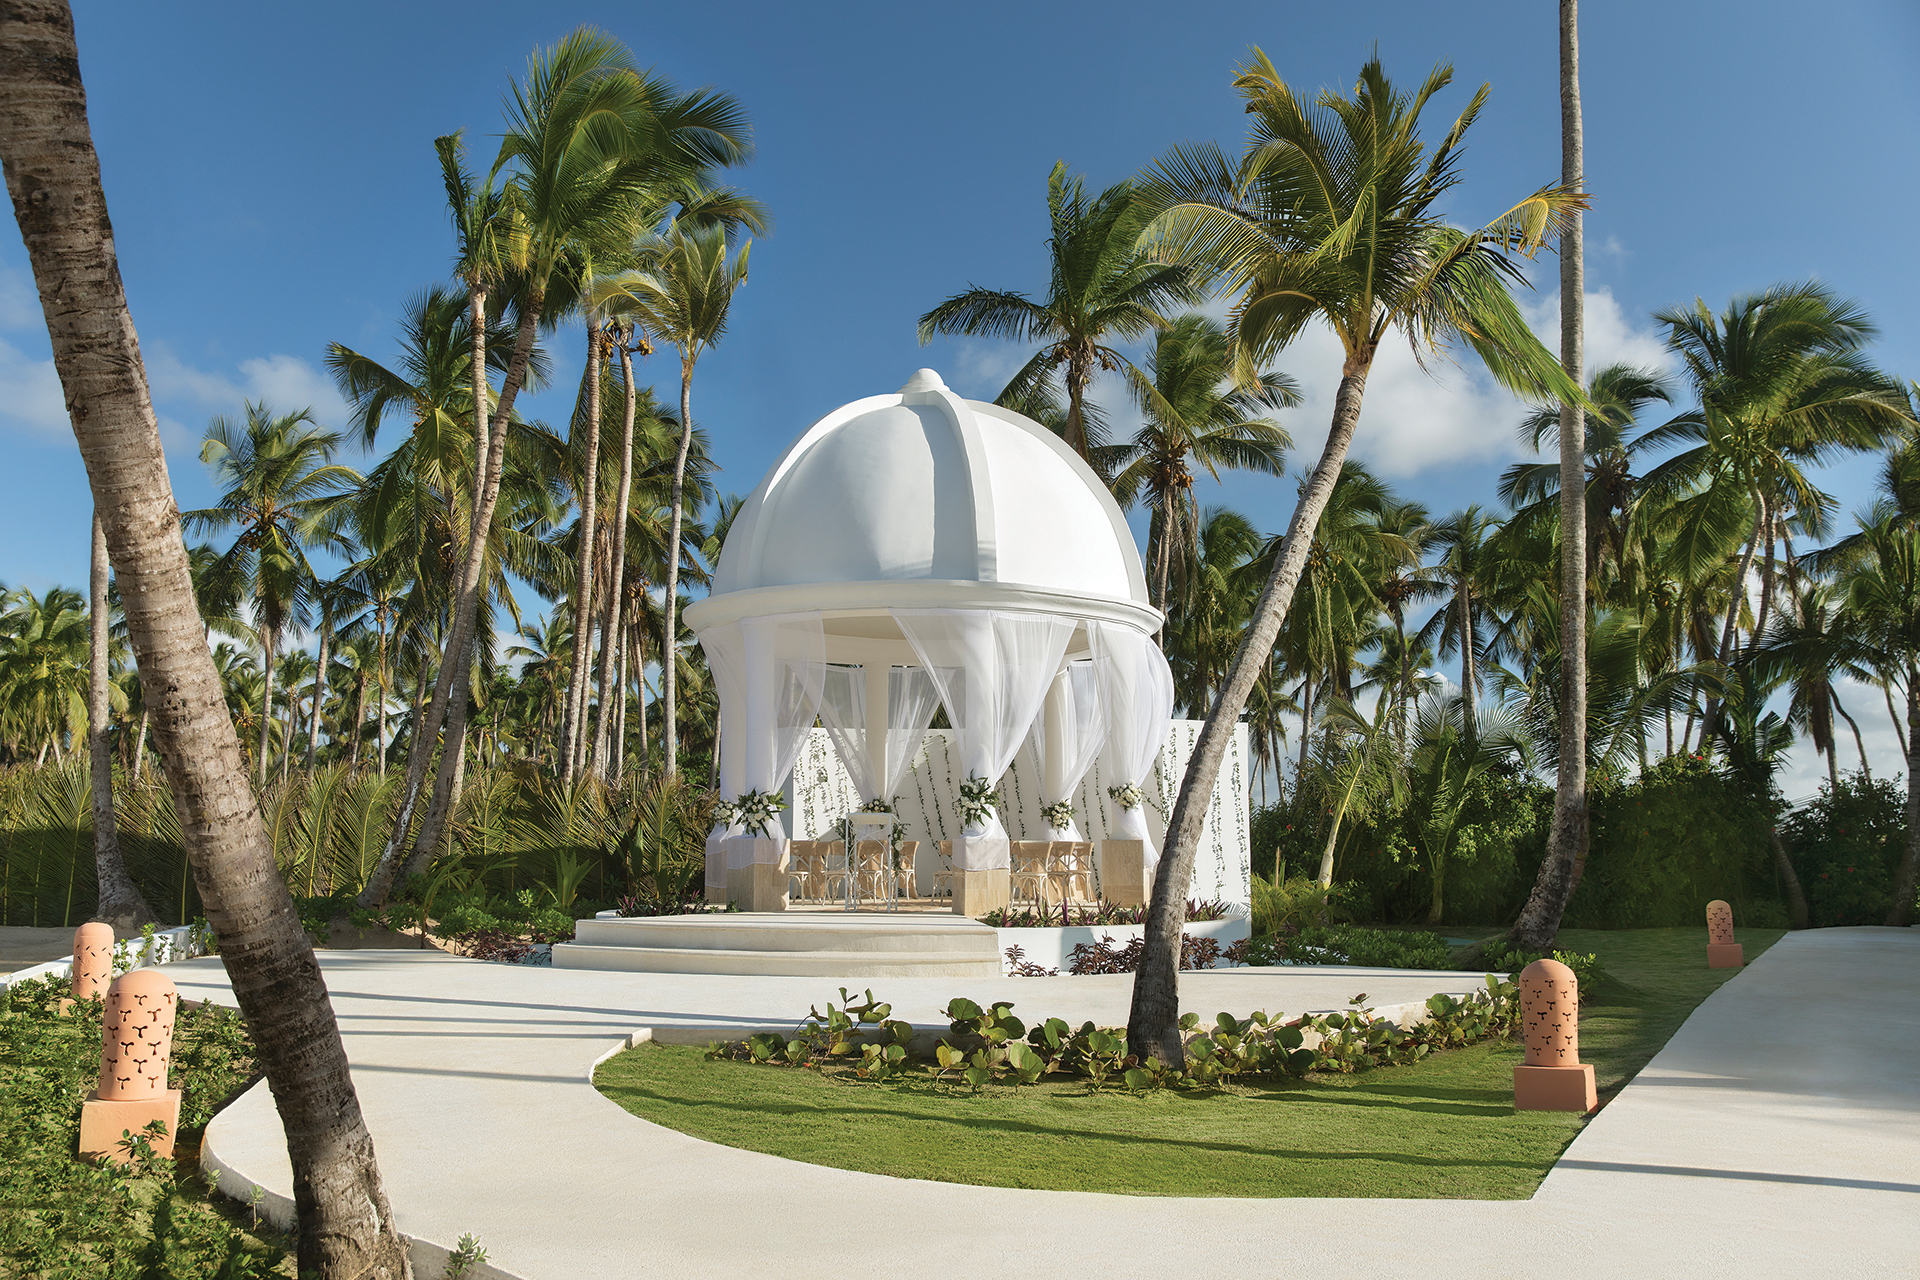 White gazebo decorations in Excellence Punta Cana